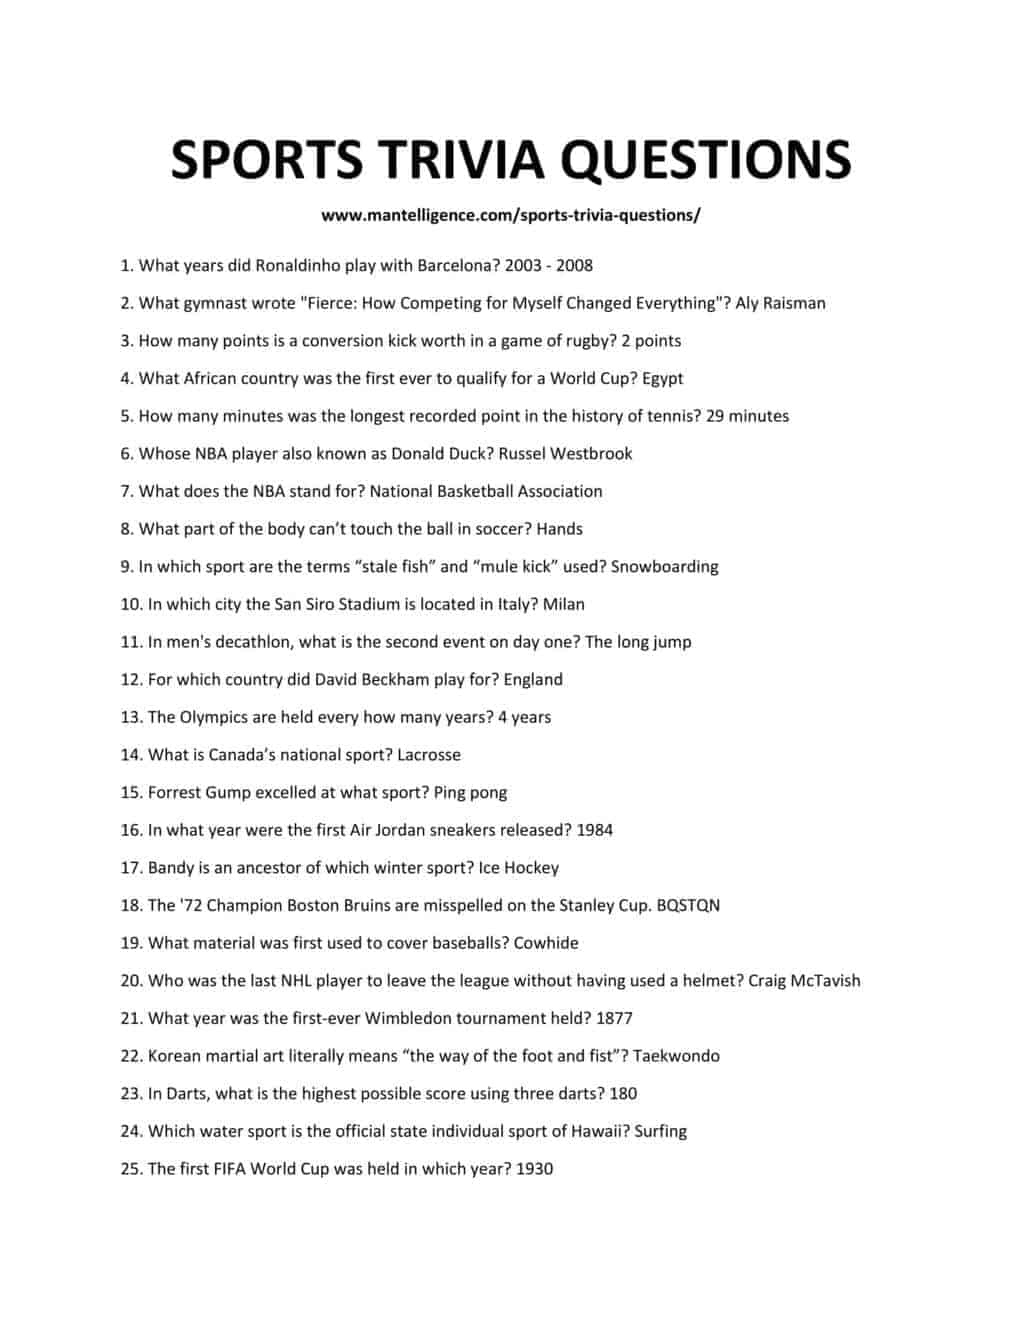 Sports Trivia Questions And Answers Printable